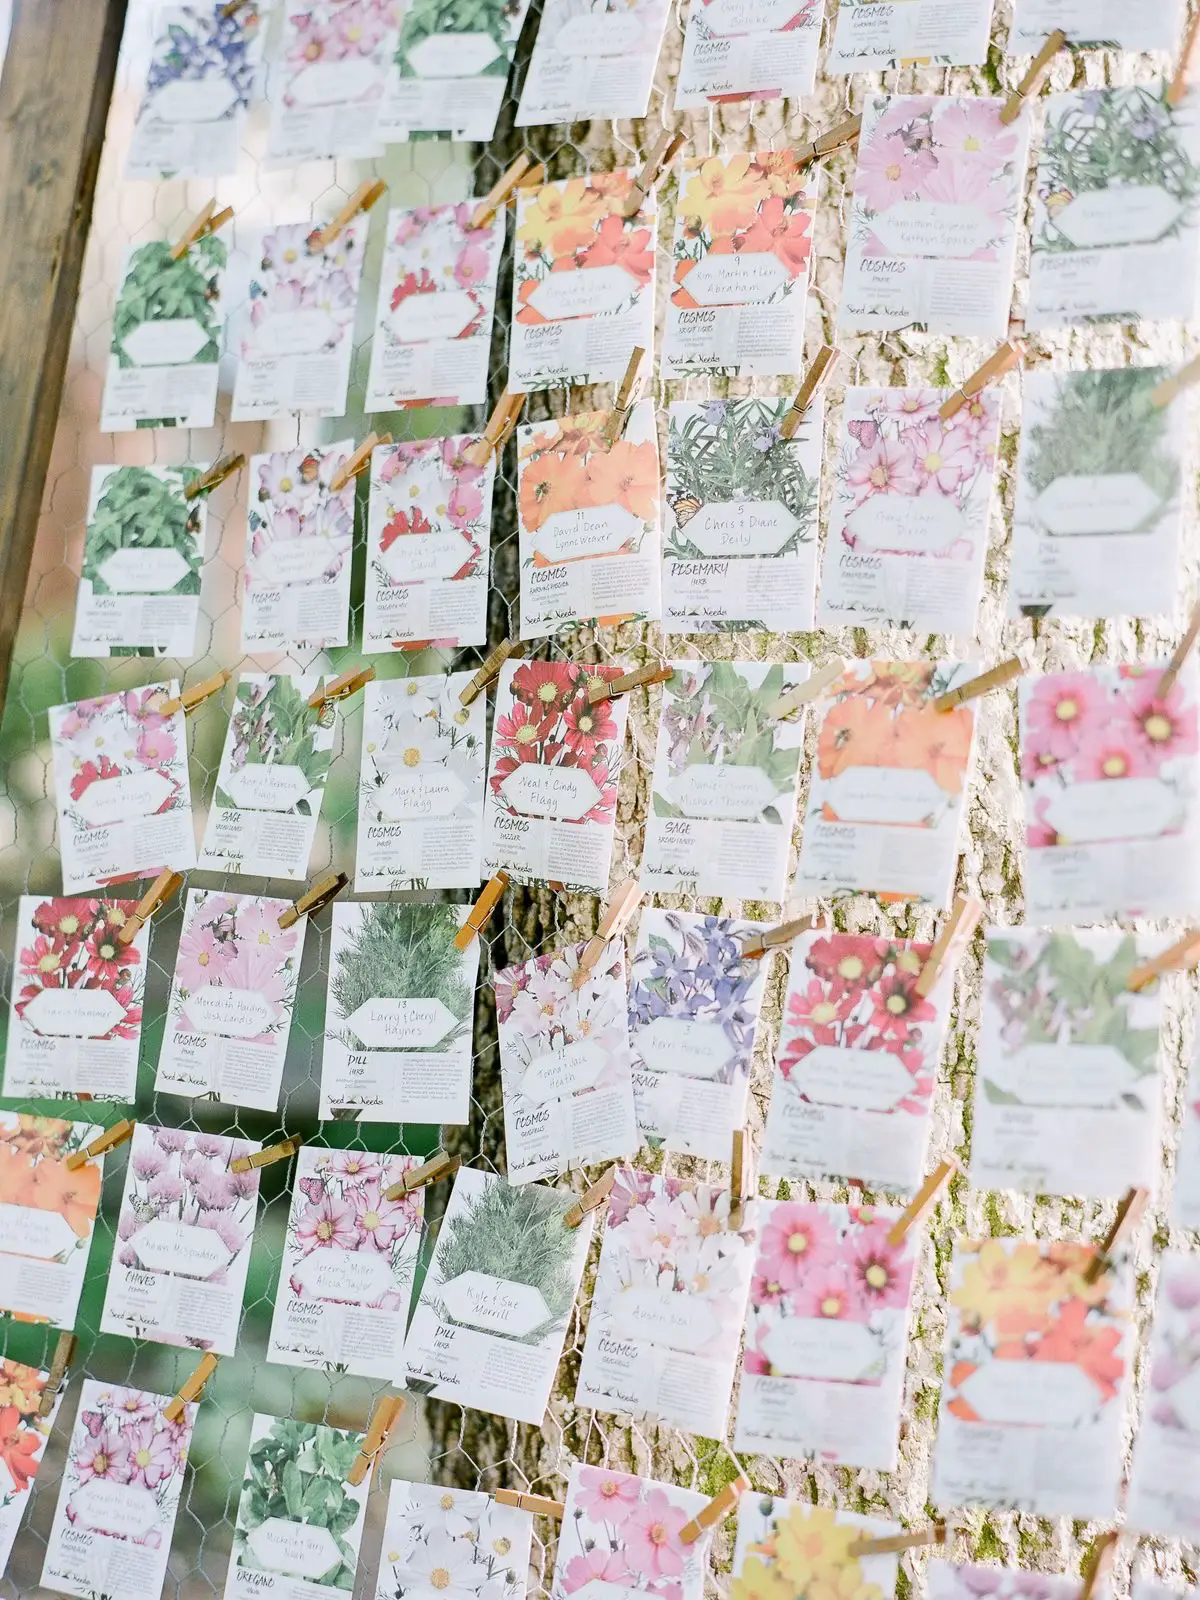  A row of cards with flowers on them.